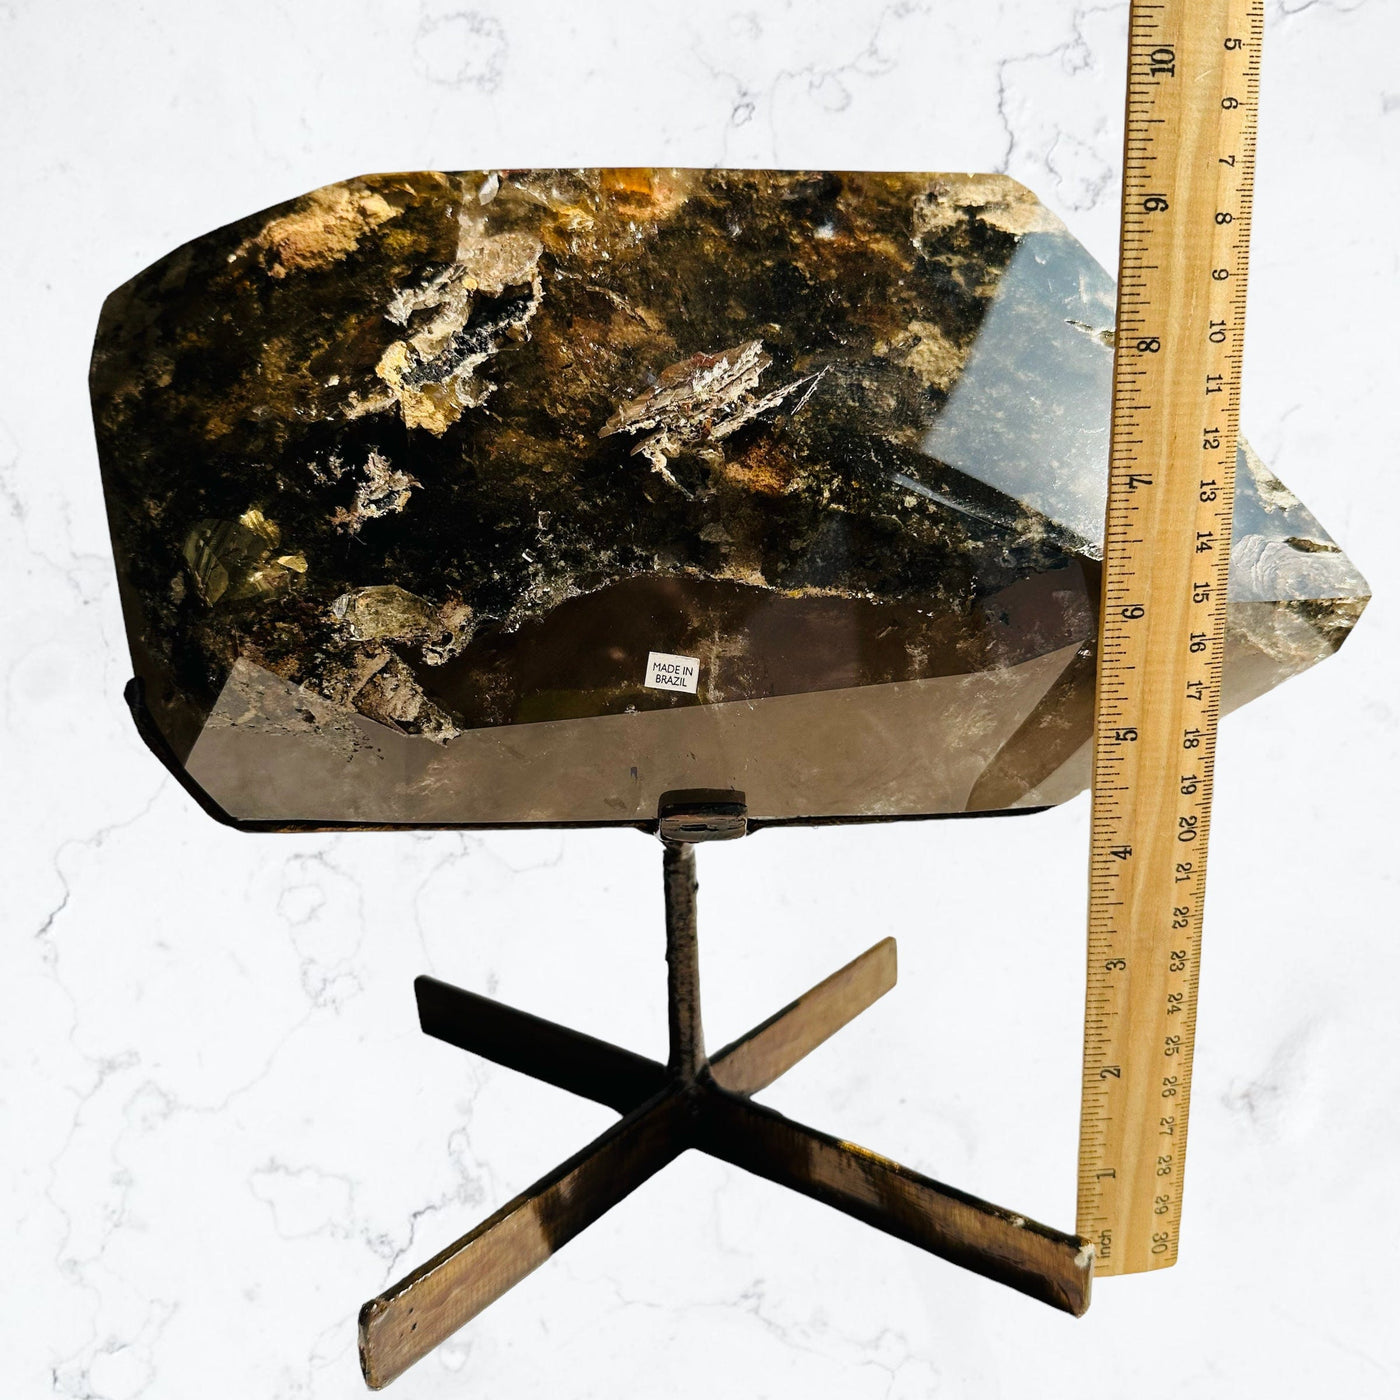 Large Lodolite Crystal Quartz on Metal Stand next to a ruler for size reference 